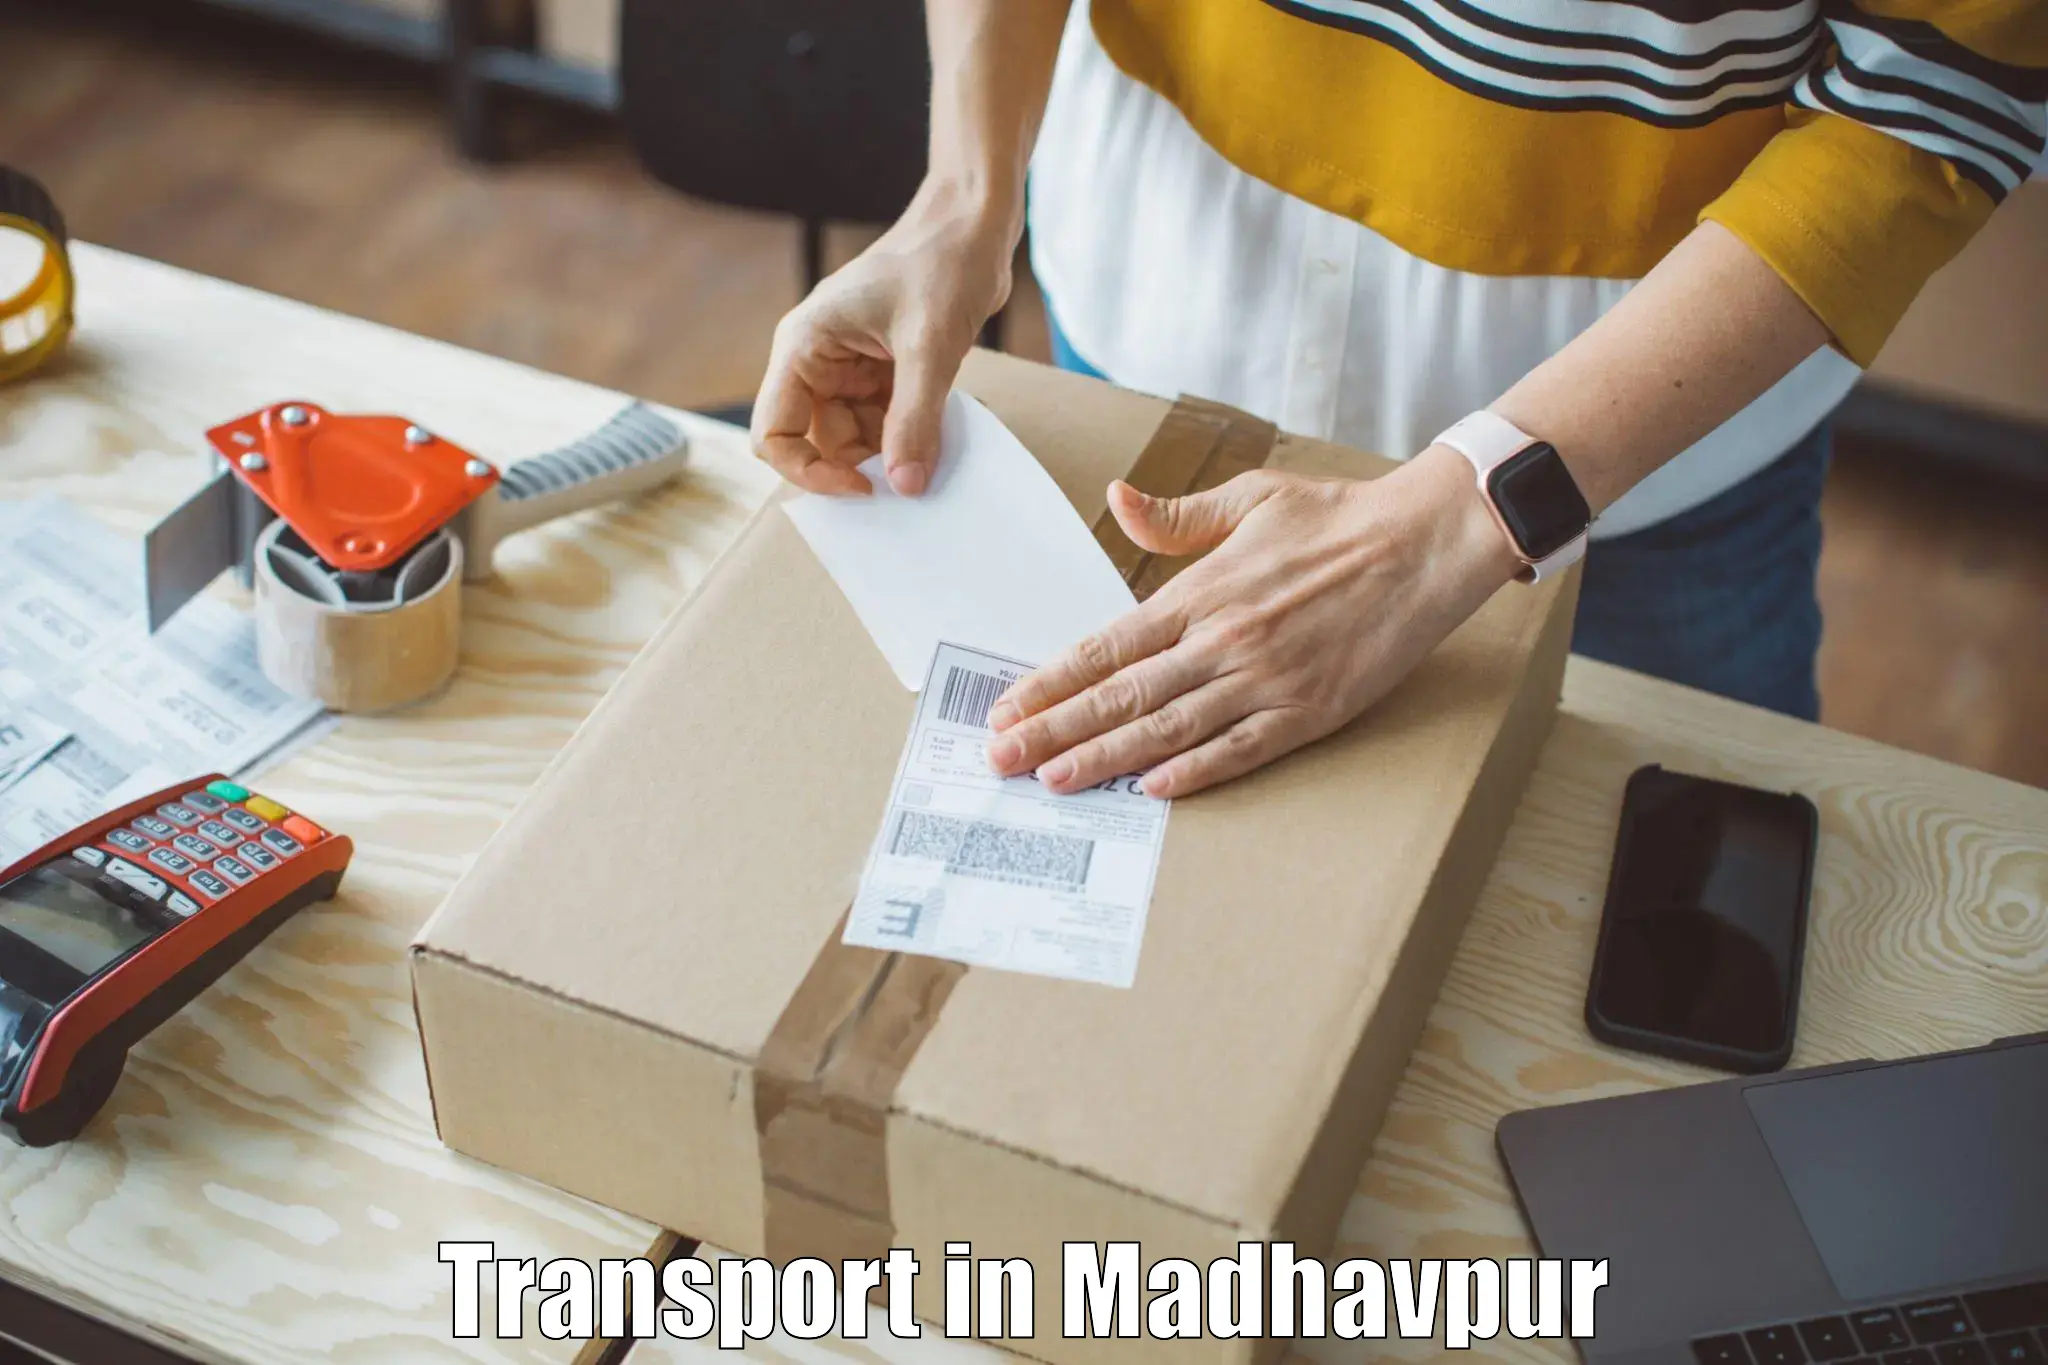 Delivery service in Madhavpur